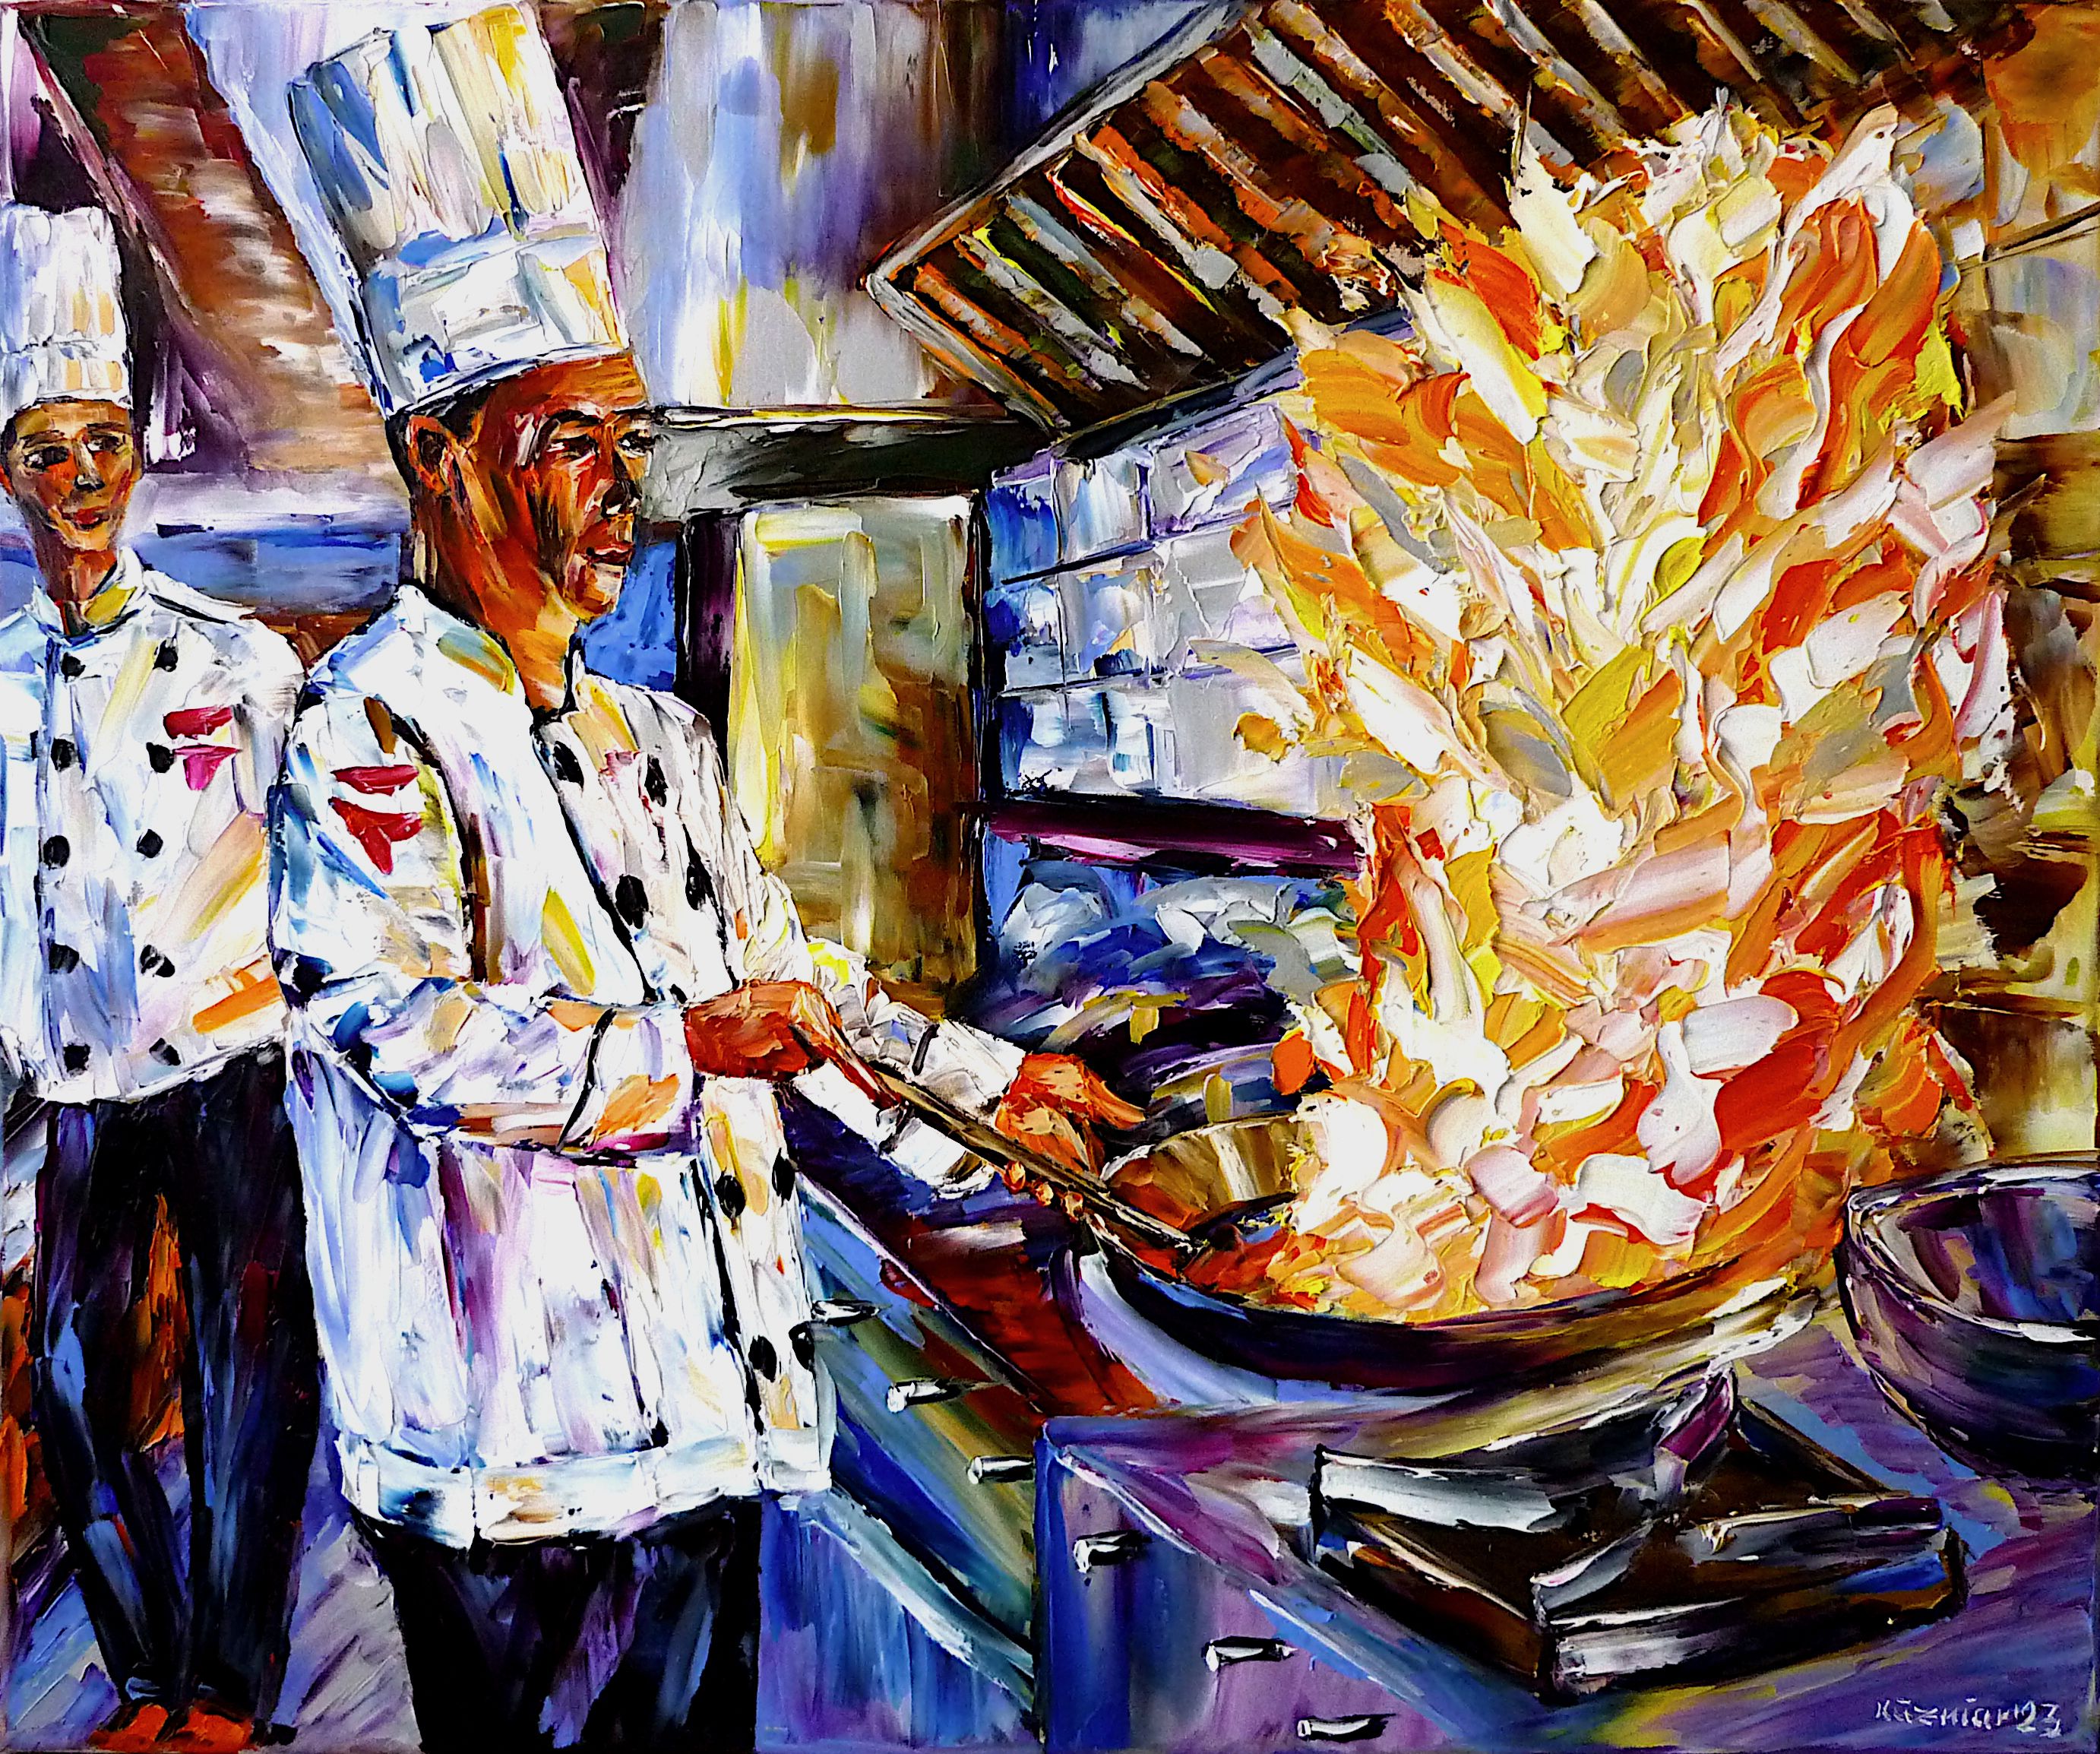 cook at the stove,cooking,in the kitchen,burning pan,cook with pan,pan flame,kitchen scenery,chef,cooking art,at the stove,fire flame,chef with chef hat,frying pan fire,at the fire,commercial kitchen,restaurant,at work,chef in white,white clothes,people painting,cooking love,cooking lovers,i love cooking,cook painting,cook picture,burning flame,genre painting,trainee in the kitchen,kitchen apprentice,learning,education,student,cookware,cooking pots,palette knife oil painting,modern art,figurative art,figurative painting,contemporary painting,abstract painting,lively colors,colorful painting,bright colors,impasto painting